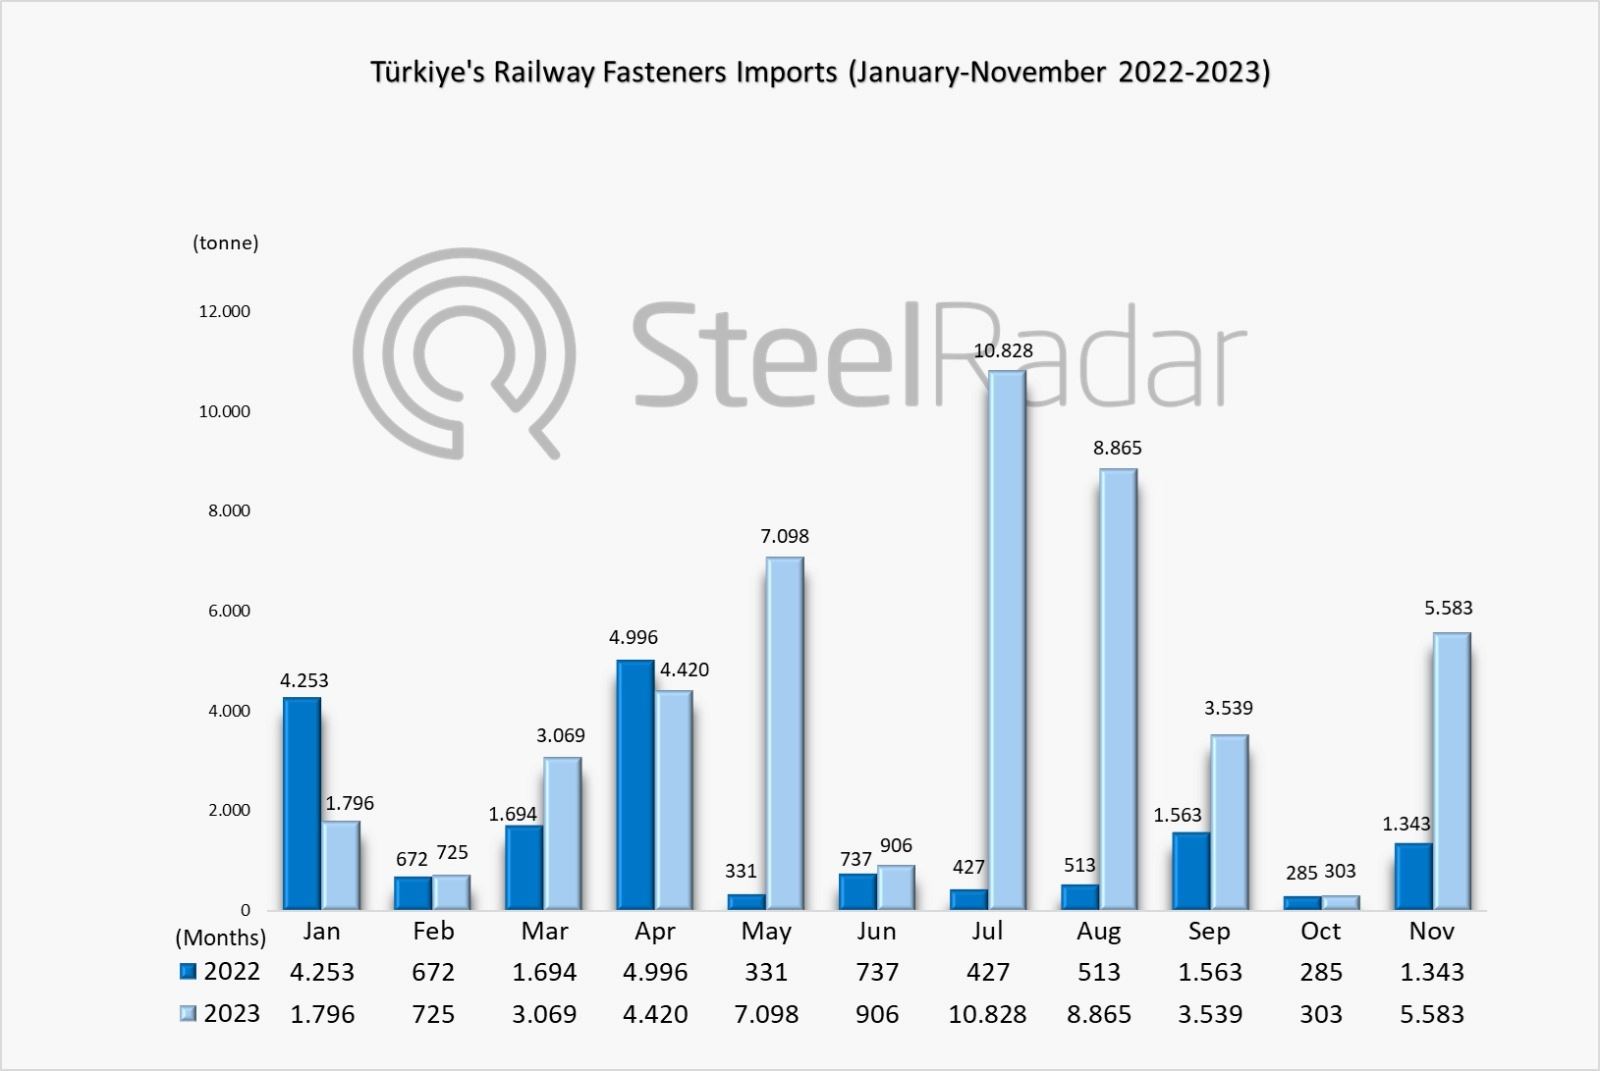 Turkiye's November imports of railway fasteners are up by %315 